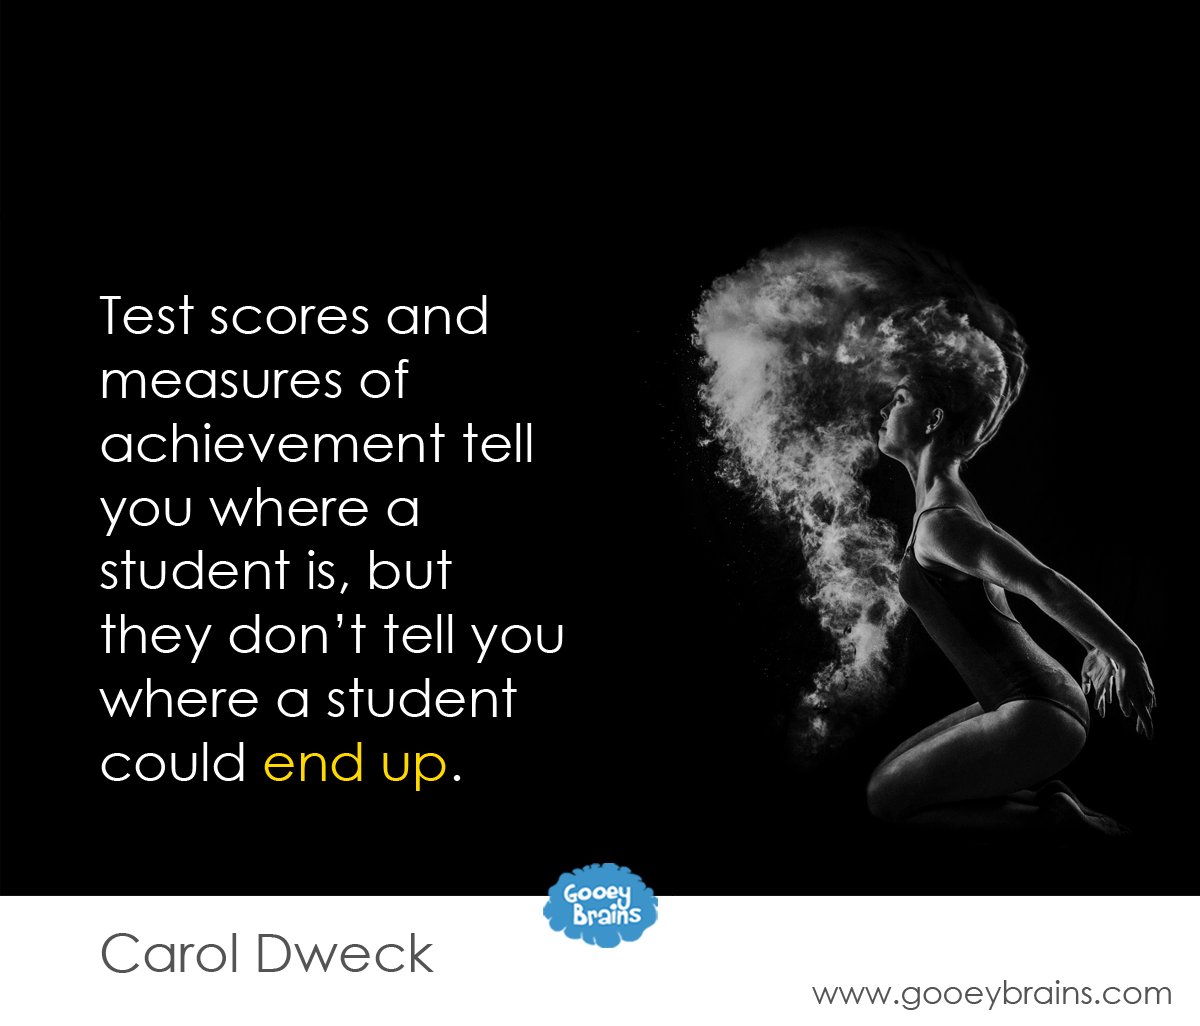 growth mindset quotes, carol dweck quotes